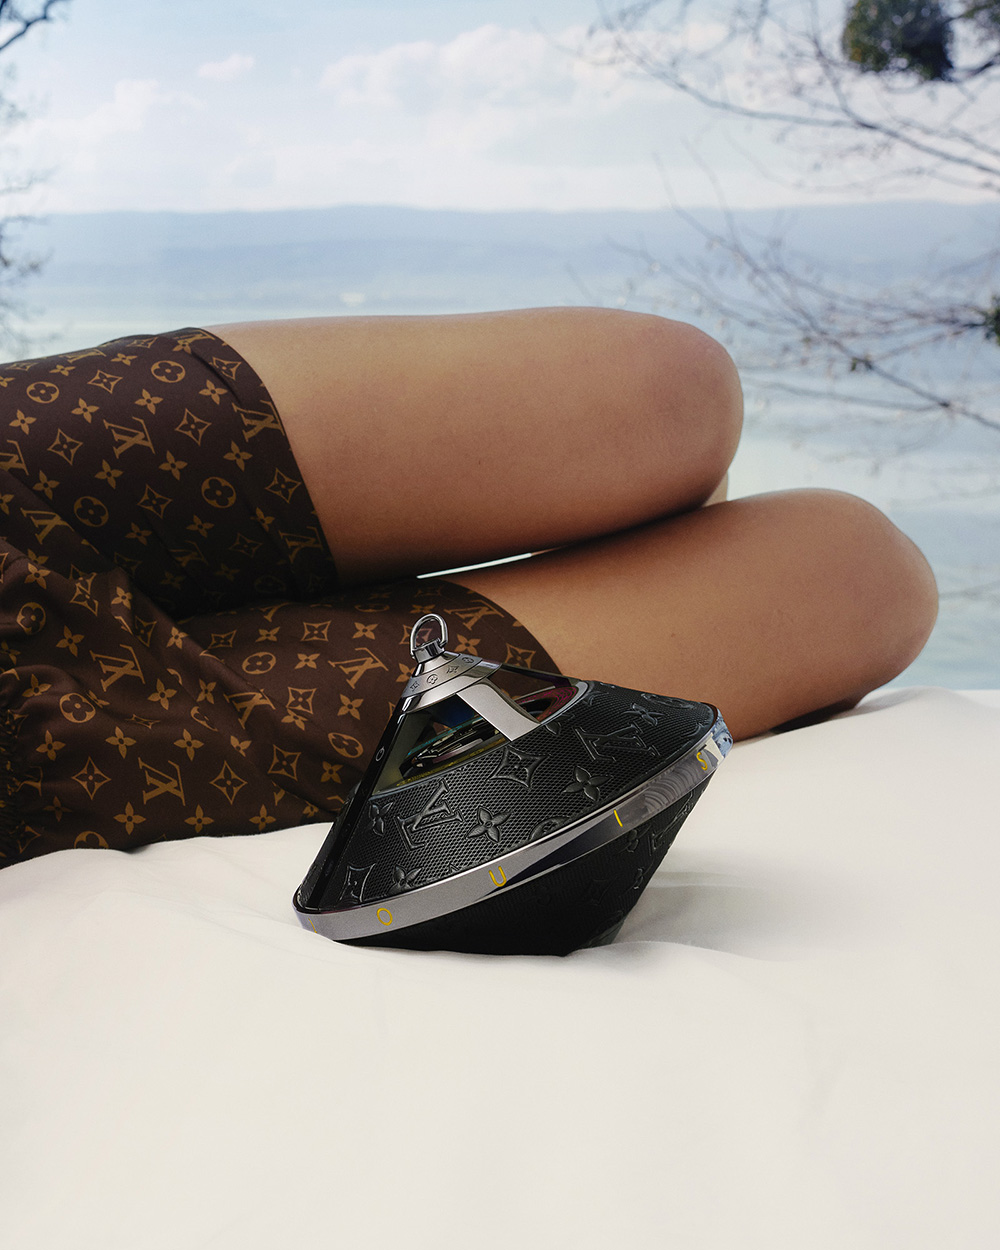 Review: Louis Vuitton Horizon Light Up Speaker is for fashion lovers